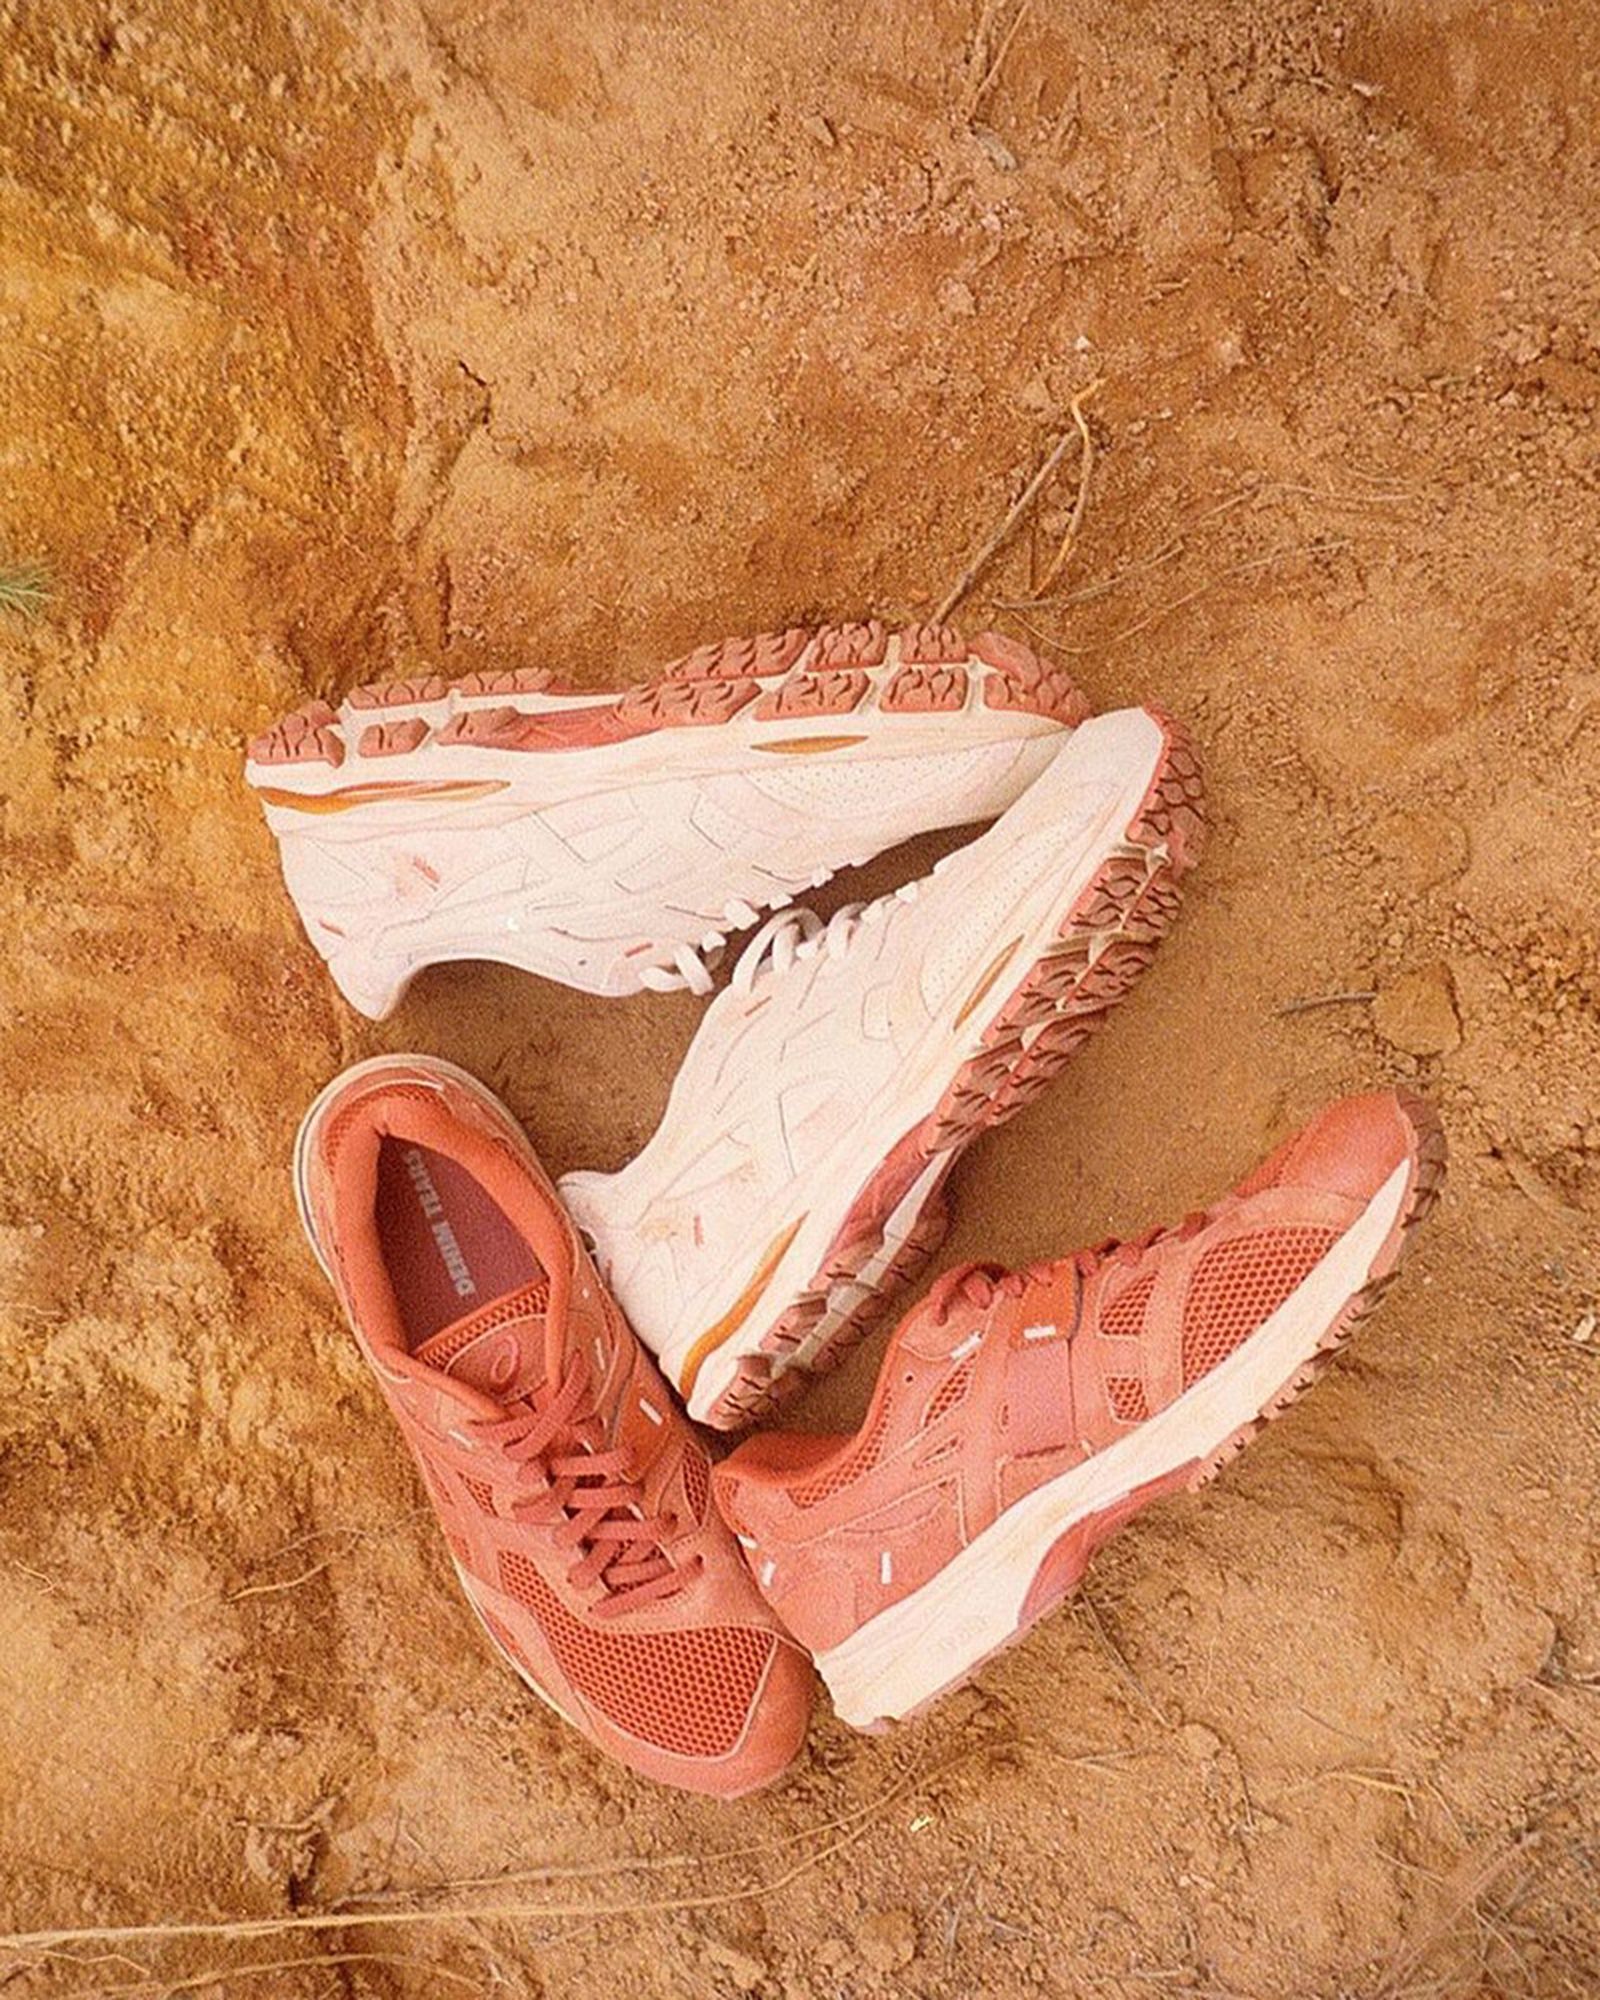 Denim Tears ASICS GEL-MC Plus “Red Clay”: Official Images Info